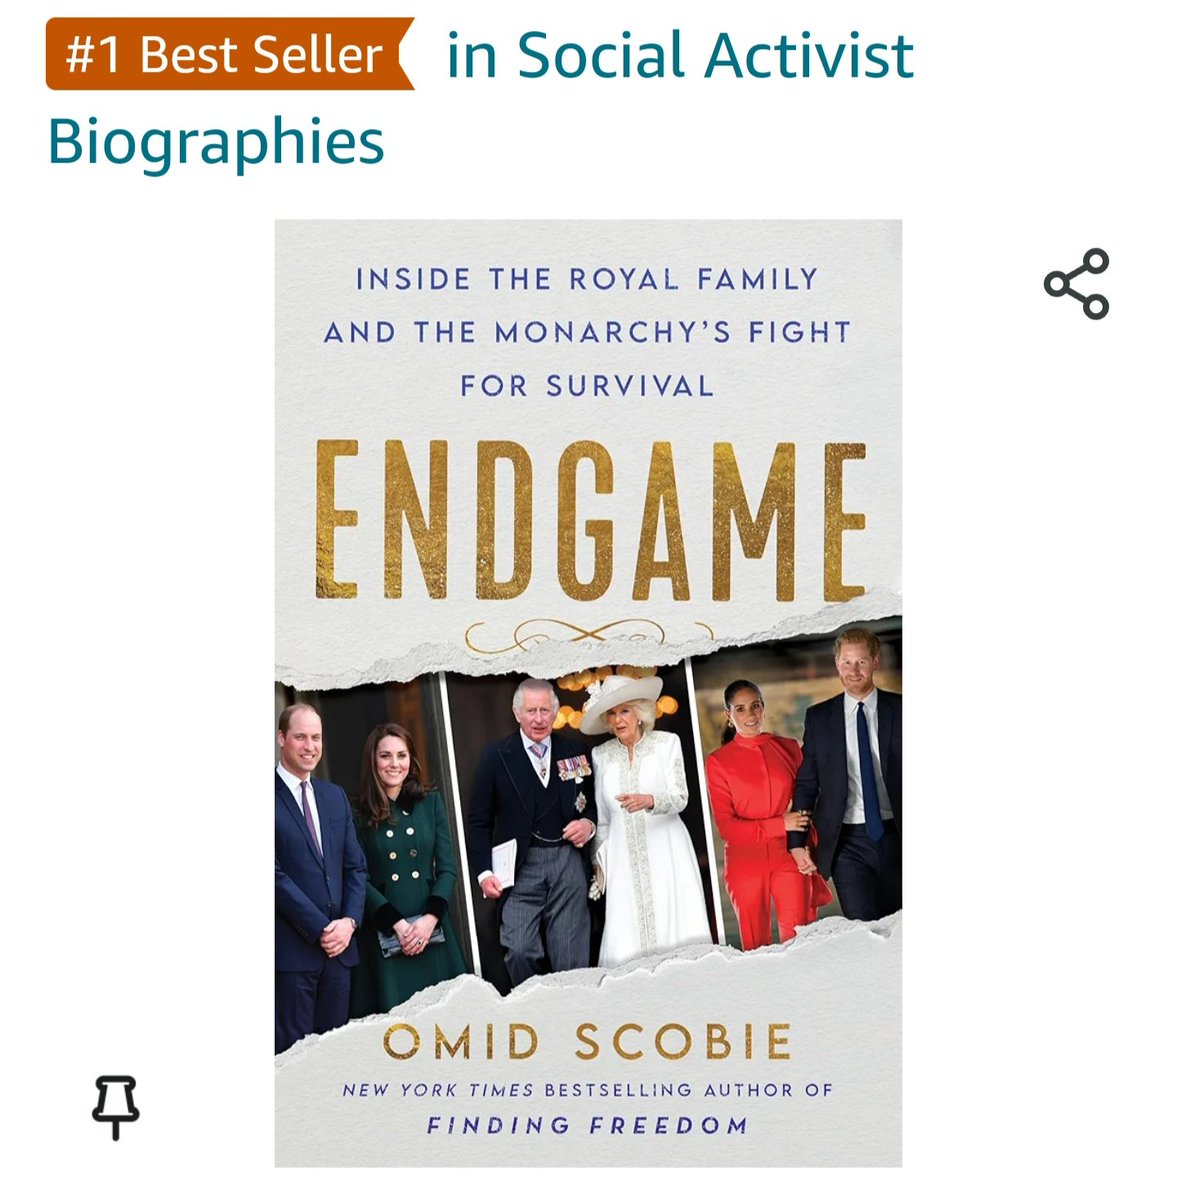 You know I'm Ms. Petty. I like to add fuel to the fire. So, here I go:  'ENDGAME' is still a #1BestSeller on Amazon. 😏 No one is listening, reading or buying Omid's book, folks. 😅